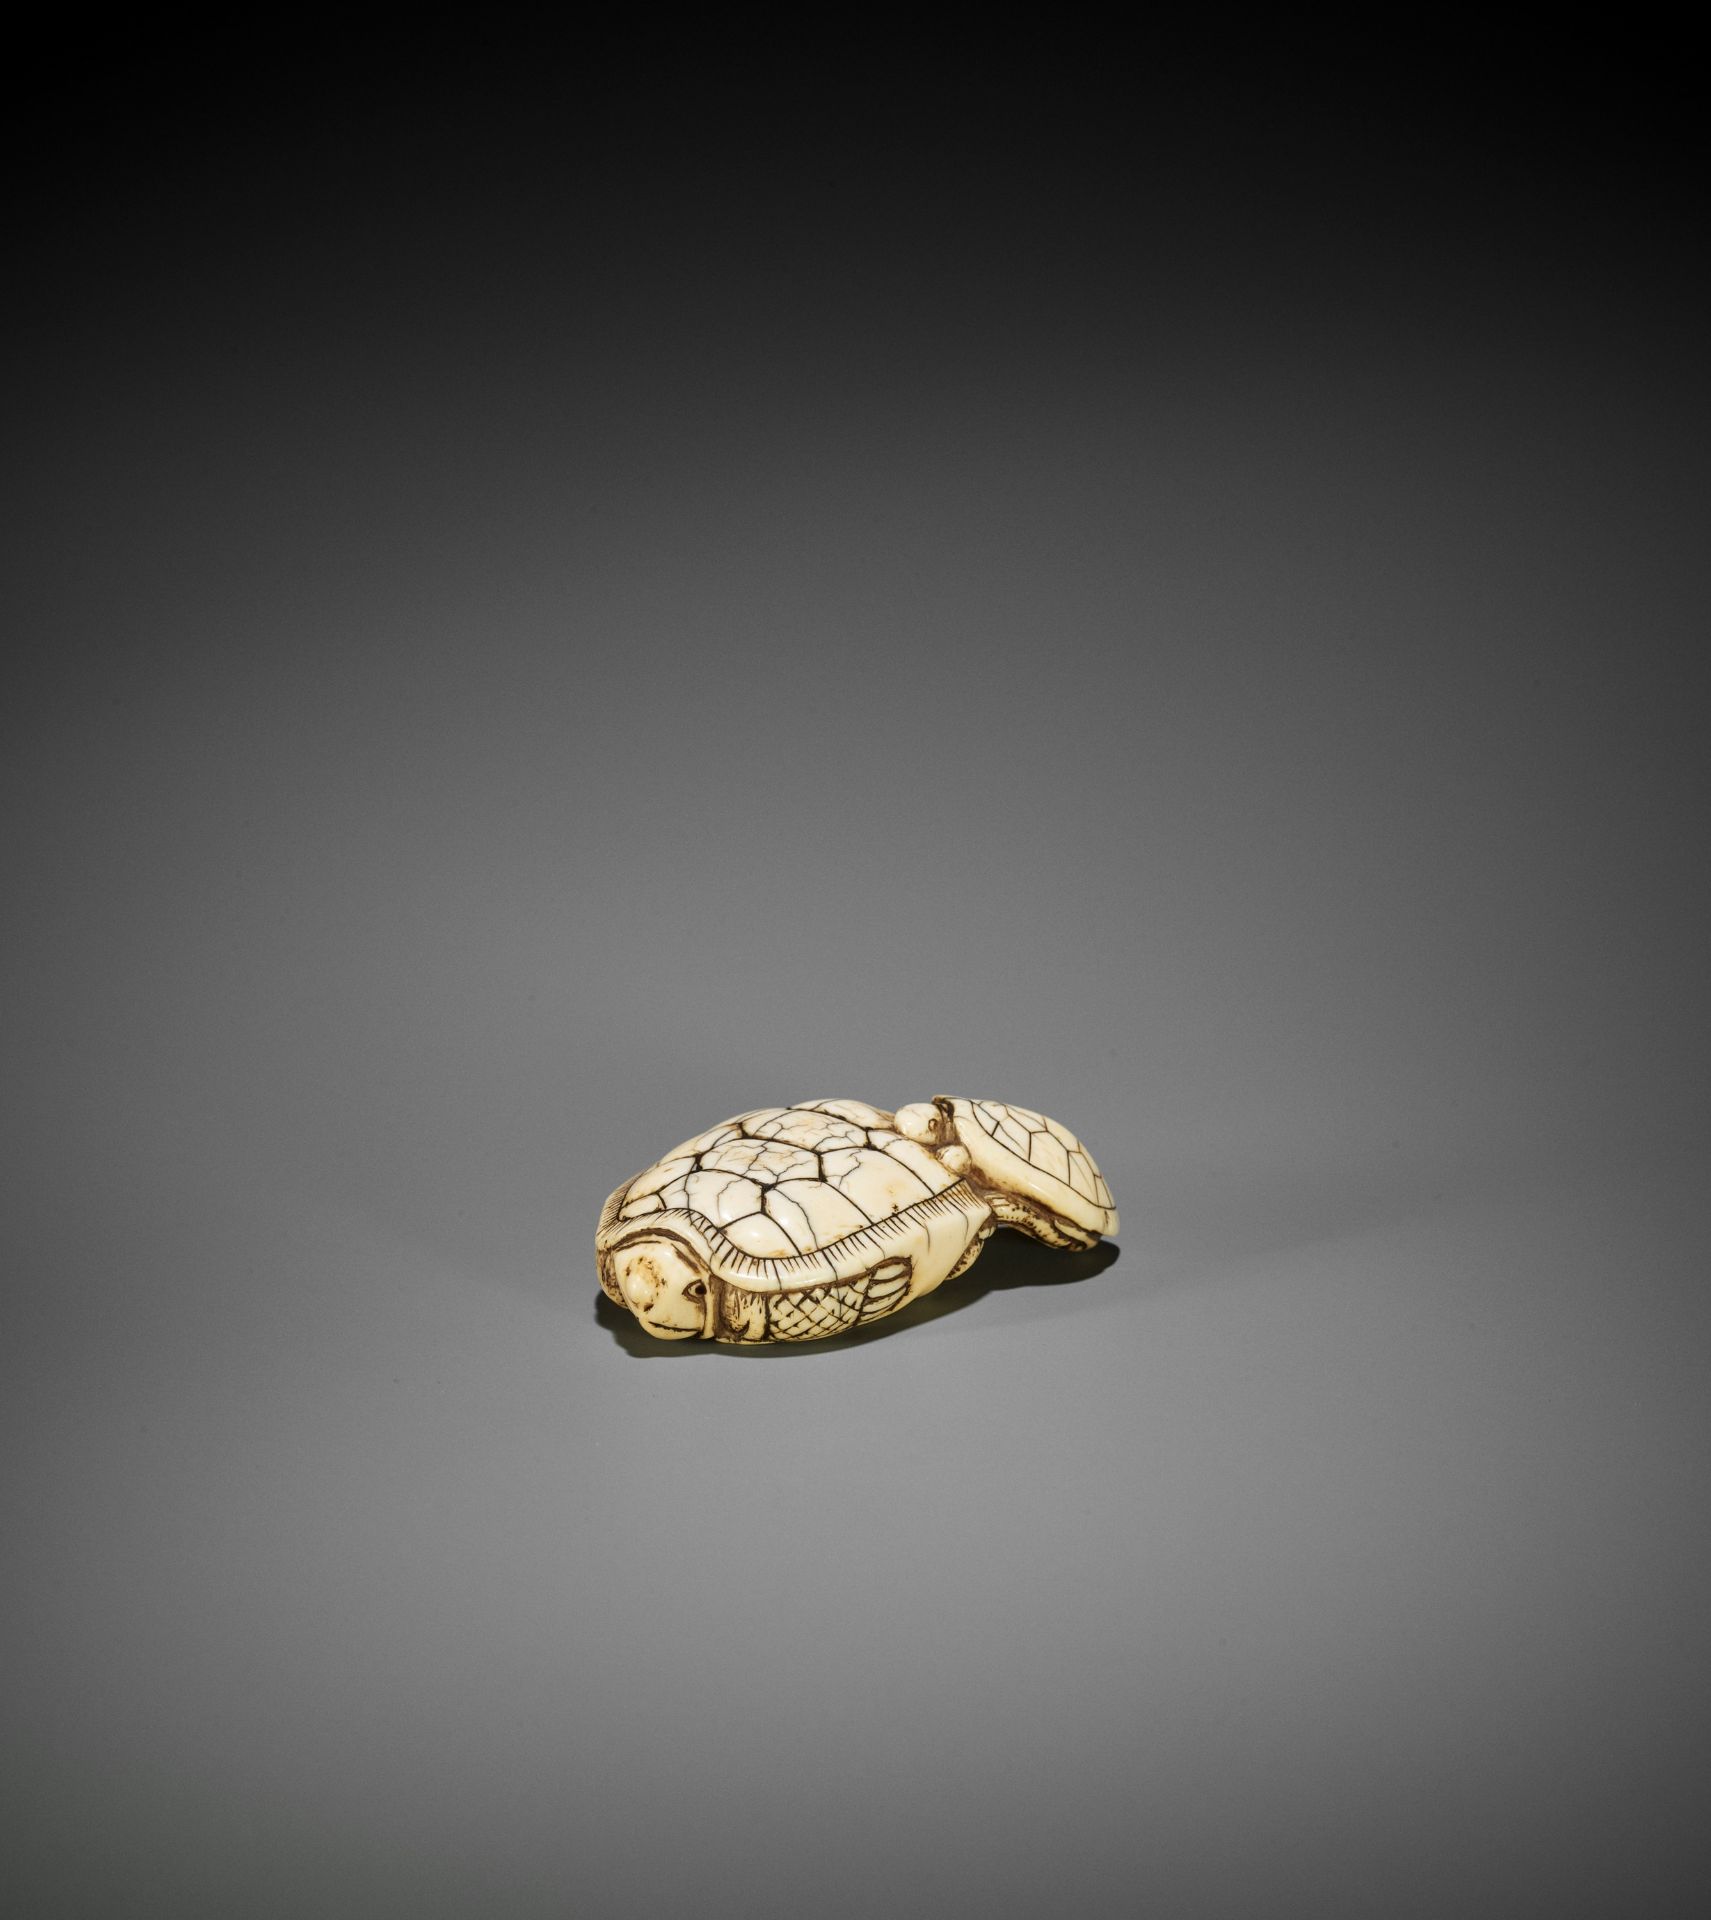 AN OLD IVORY NETSUKE OF A TURTLE WITH YOUNG